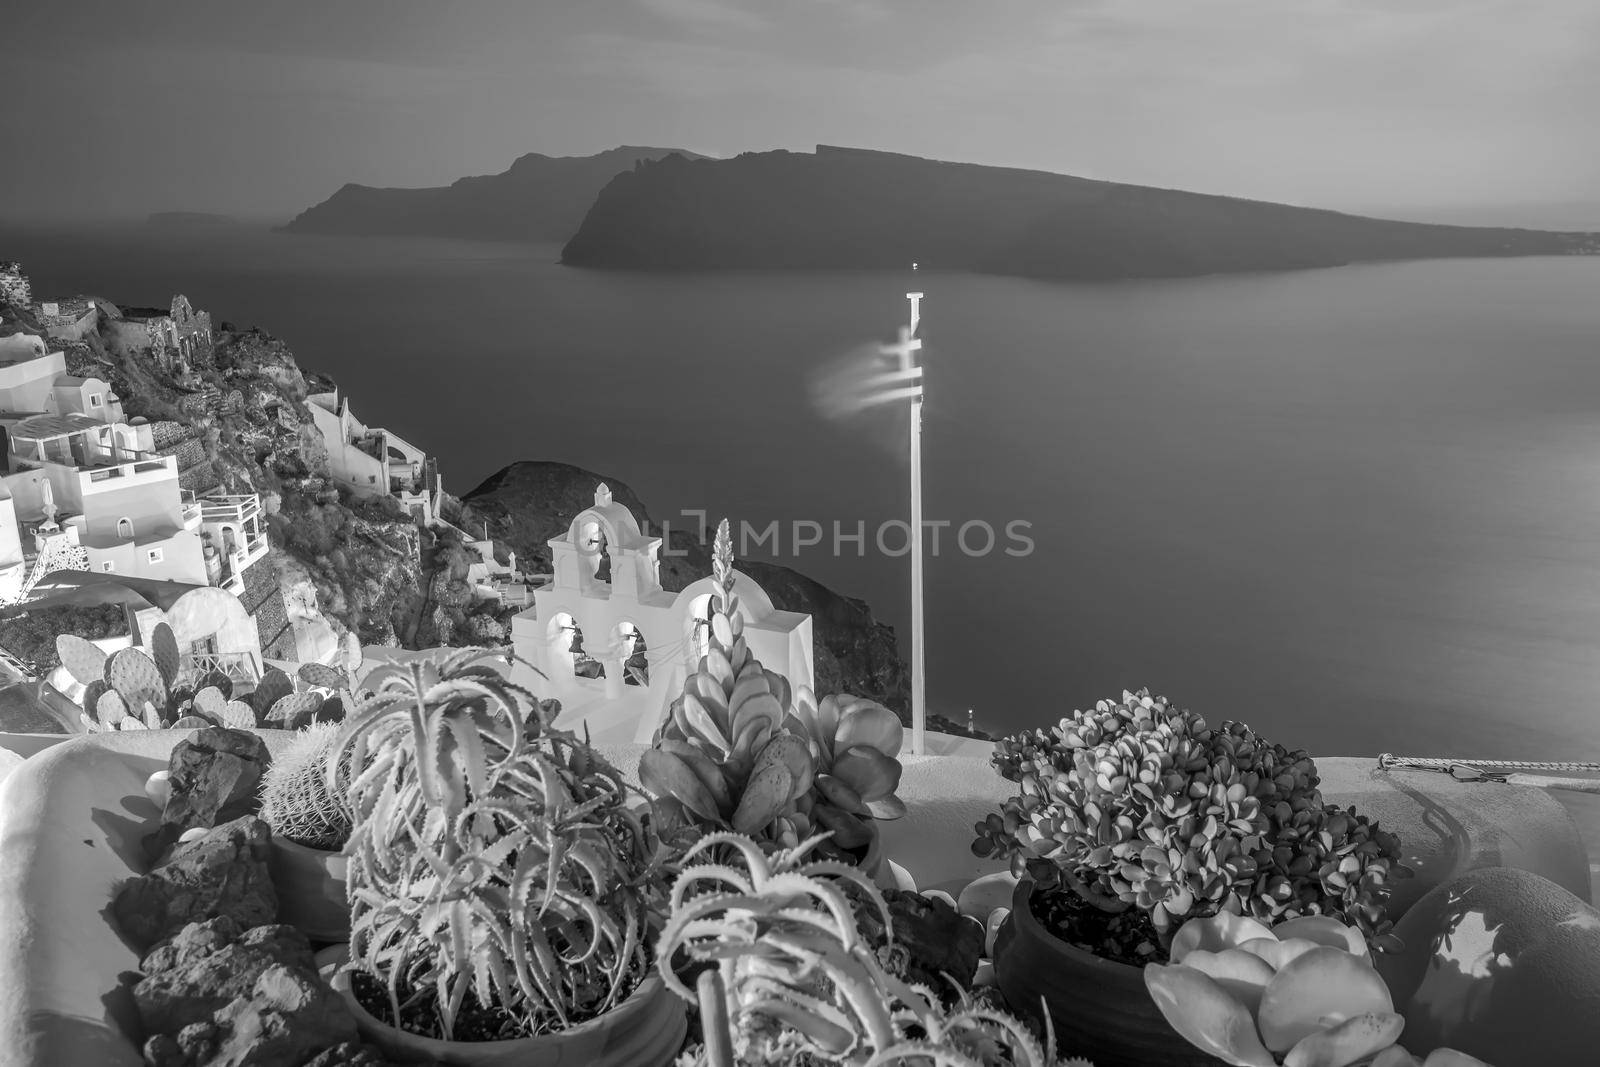 Oia town cityscape at Santorini island in Greece by f11photo